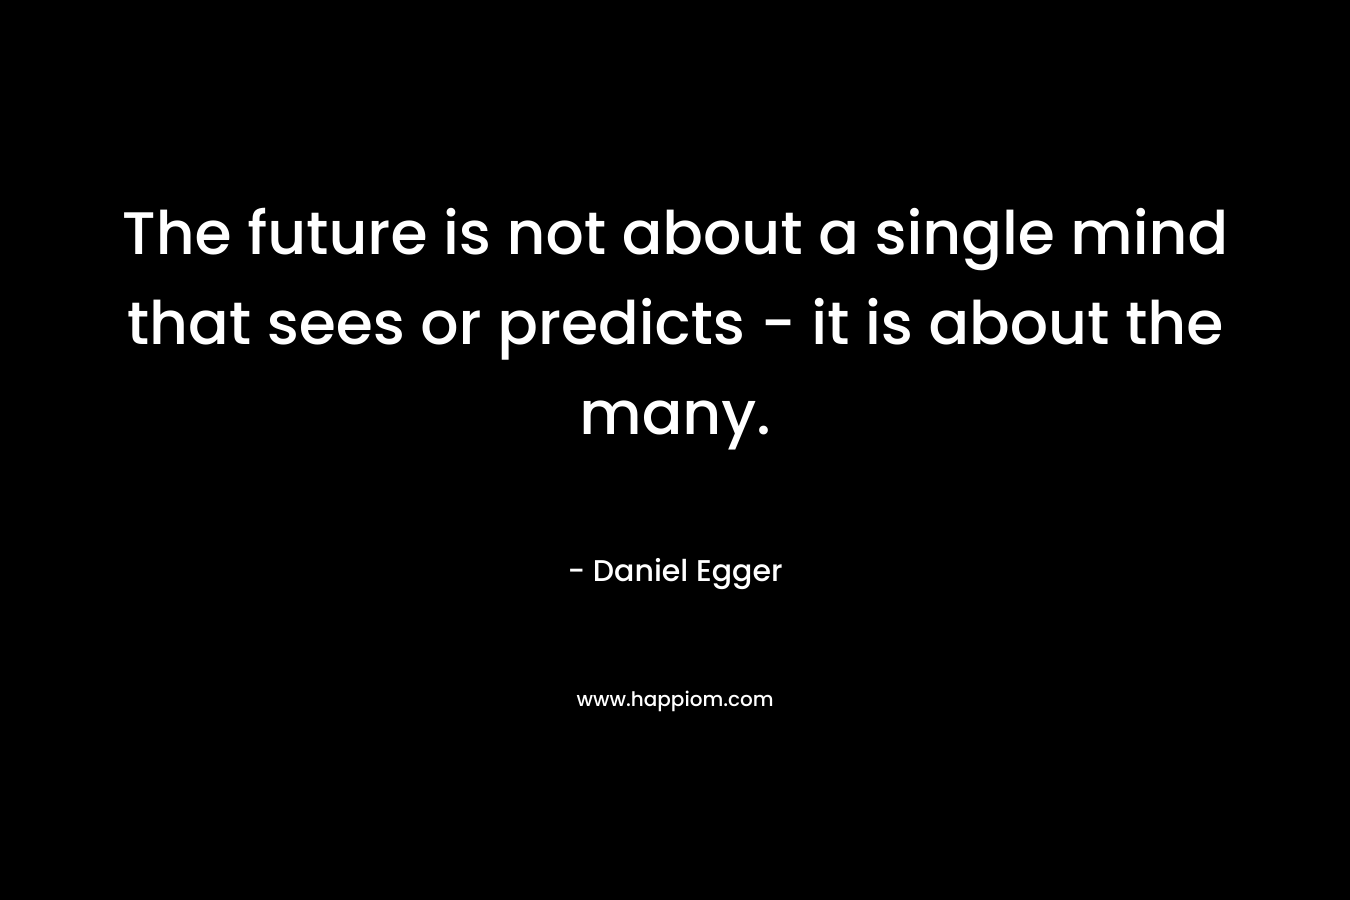 The future is not about a single mind that sees or predicts - it is about the many.